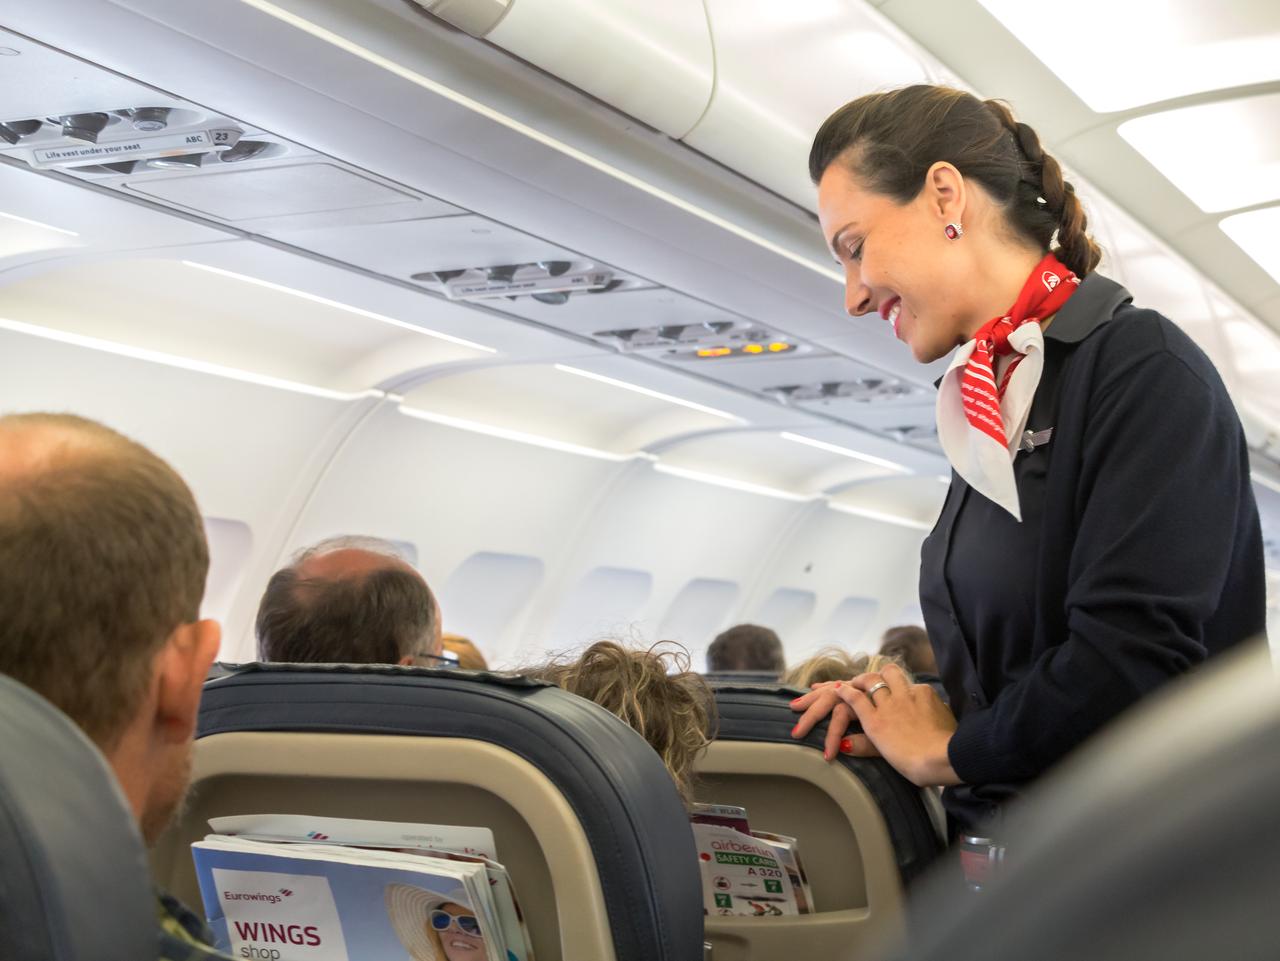 Thessaloniky: A female flight attendant is speaking with a passenger sitting in the economy class of the route Thessaloniky - Munich of Eurowings Airline.